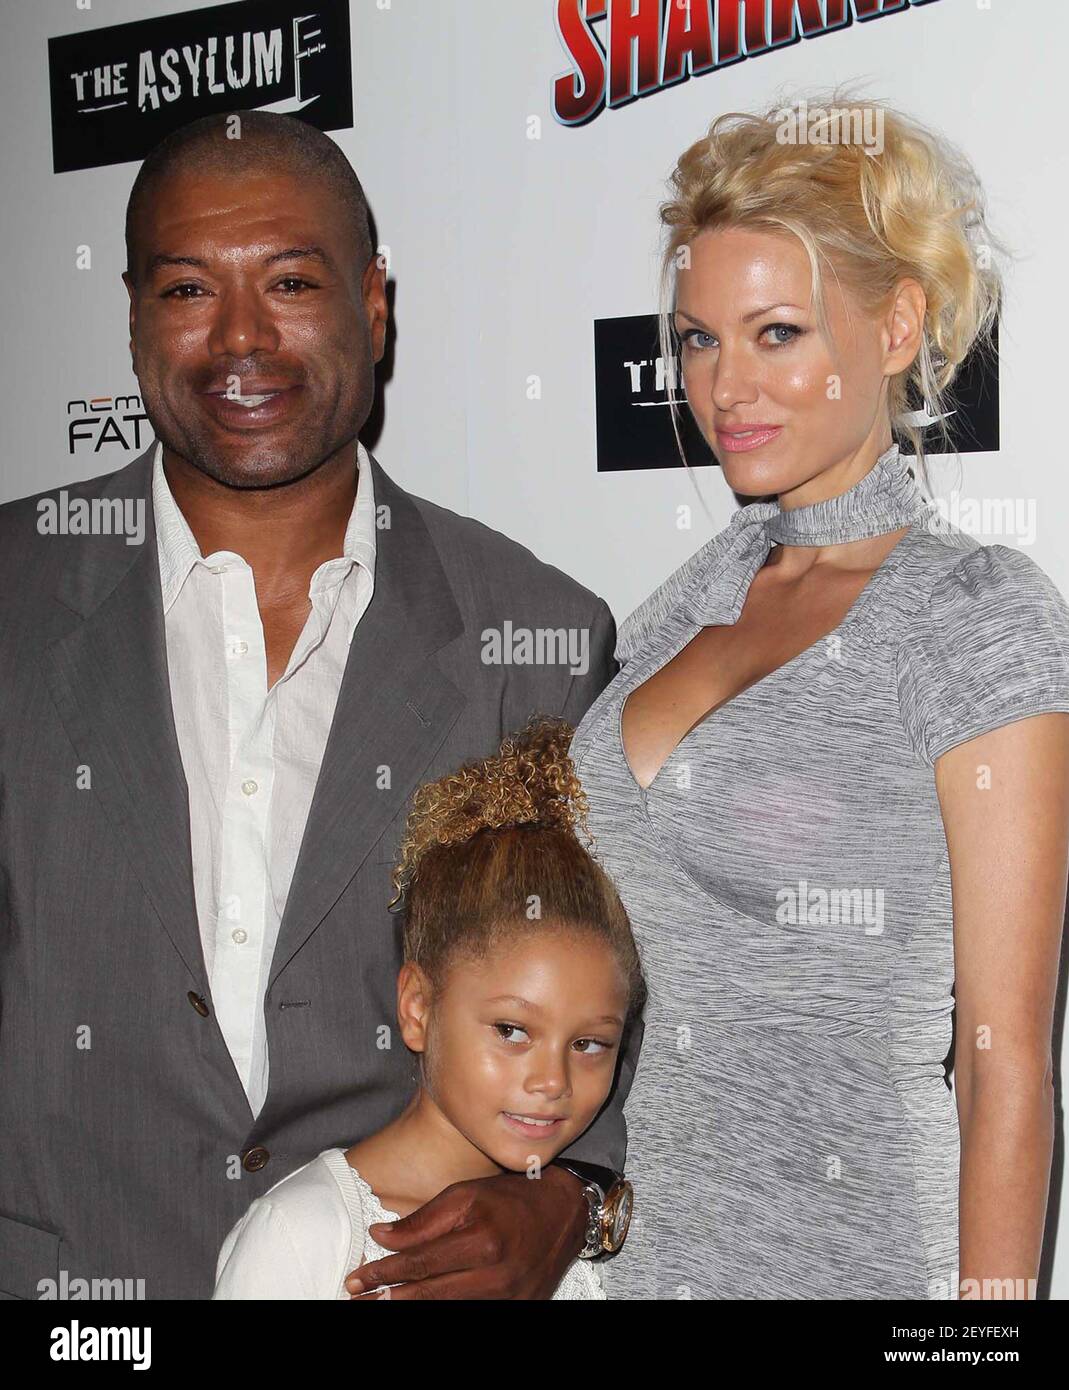 Photos and Pictures - 2 August 2013 - Hollywood, California - Chris Judge,  Gianna Patton, Catrina Christine Judge. Sharknado - Los Angeles Premiere  Held At Regal Cinemas L.A. Live. Photo Credit: Kevan Brooks/AdMedia